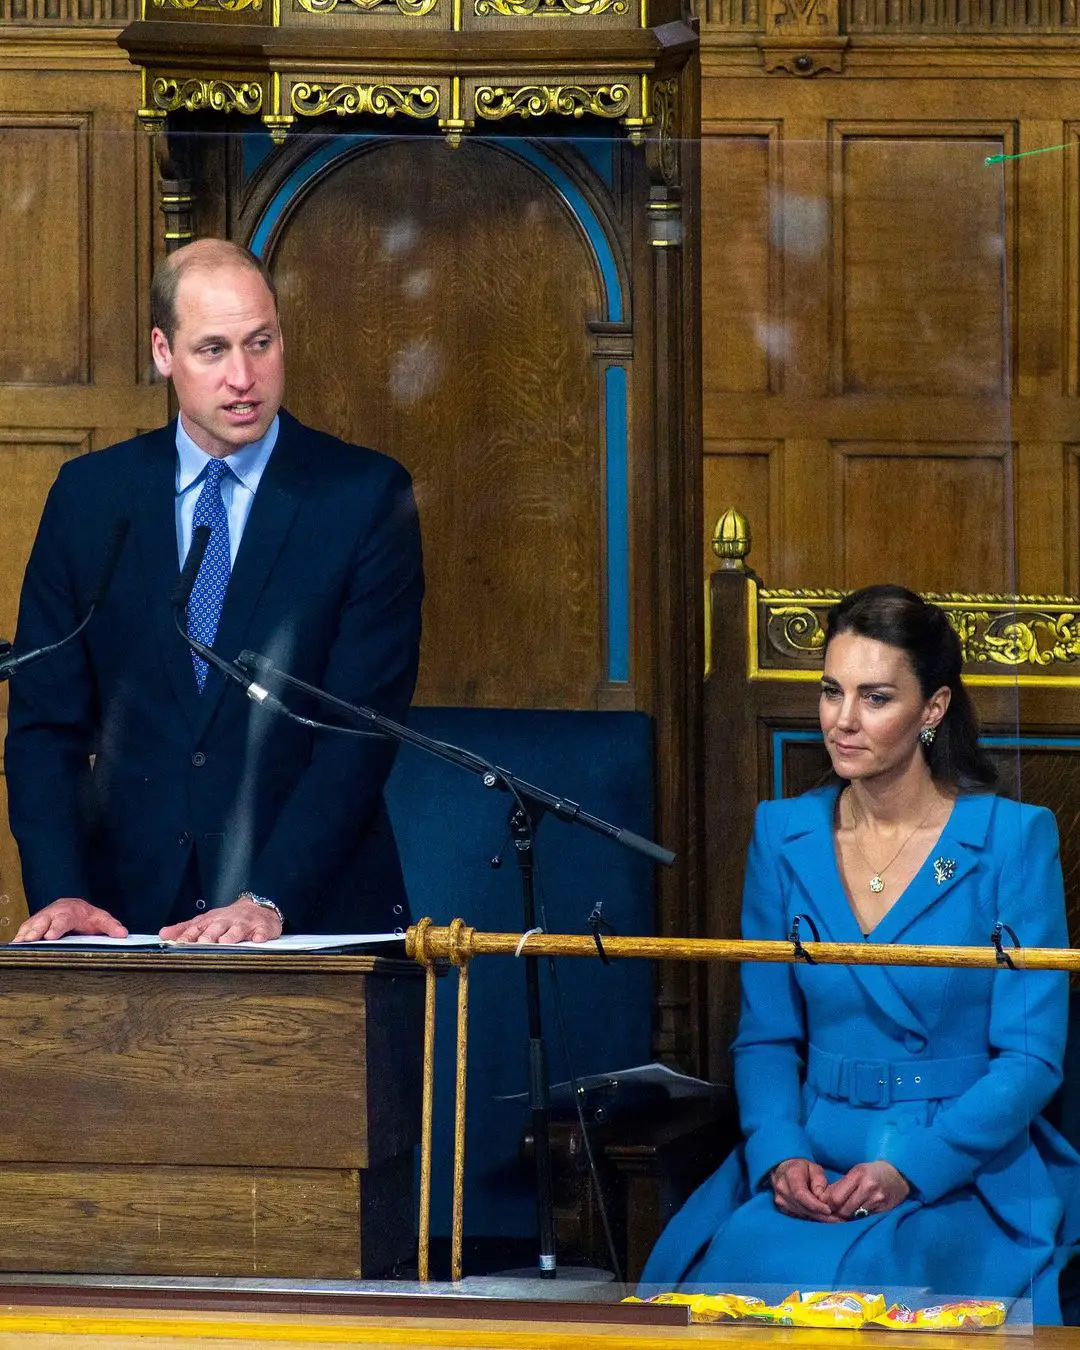 The Duke and Duchess of Cambridge attended the closing ceremony of General Assembly of Church of Scotlanda